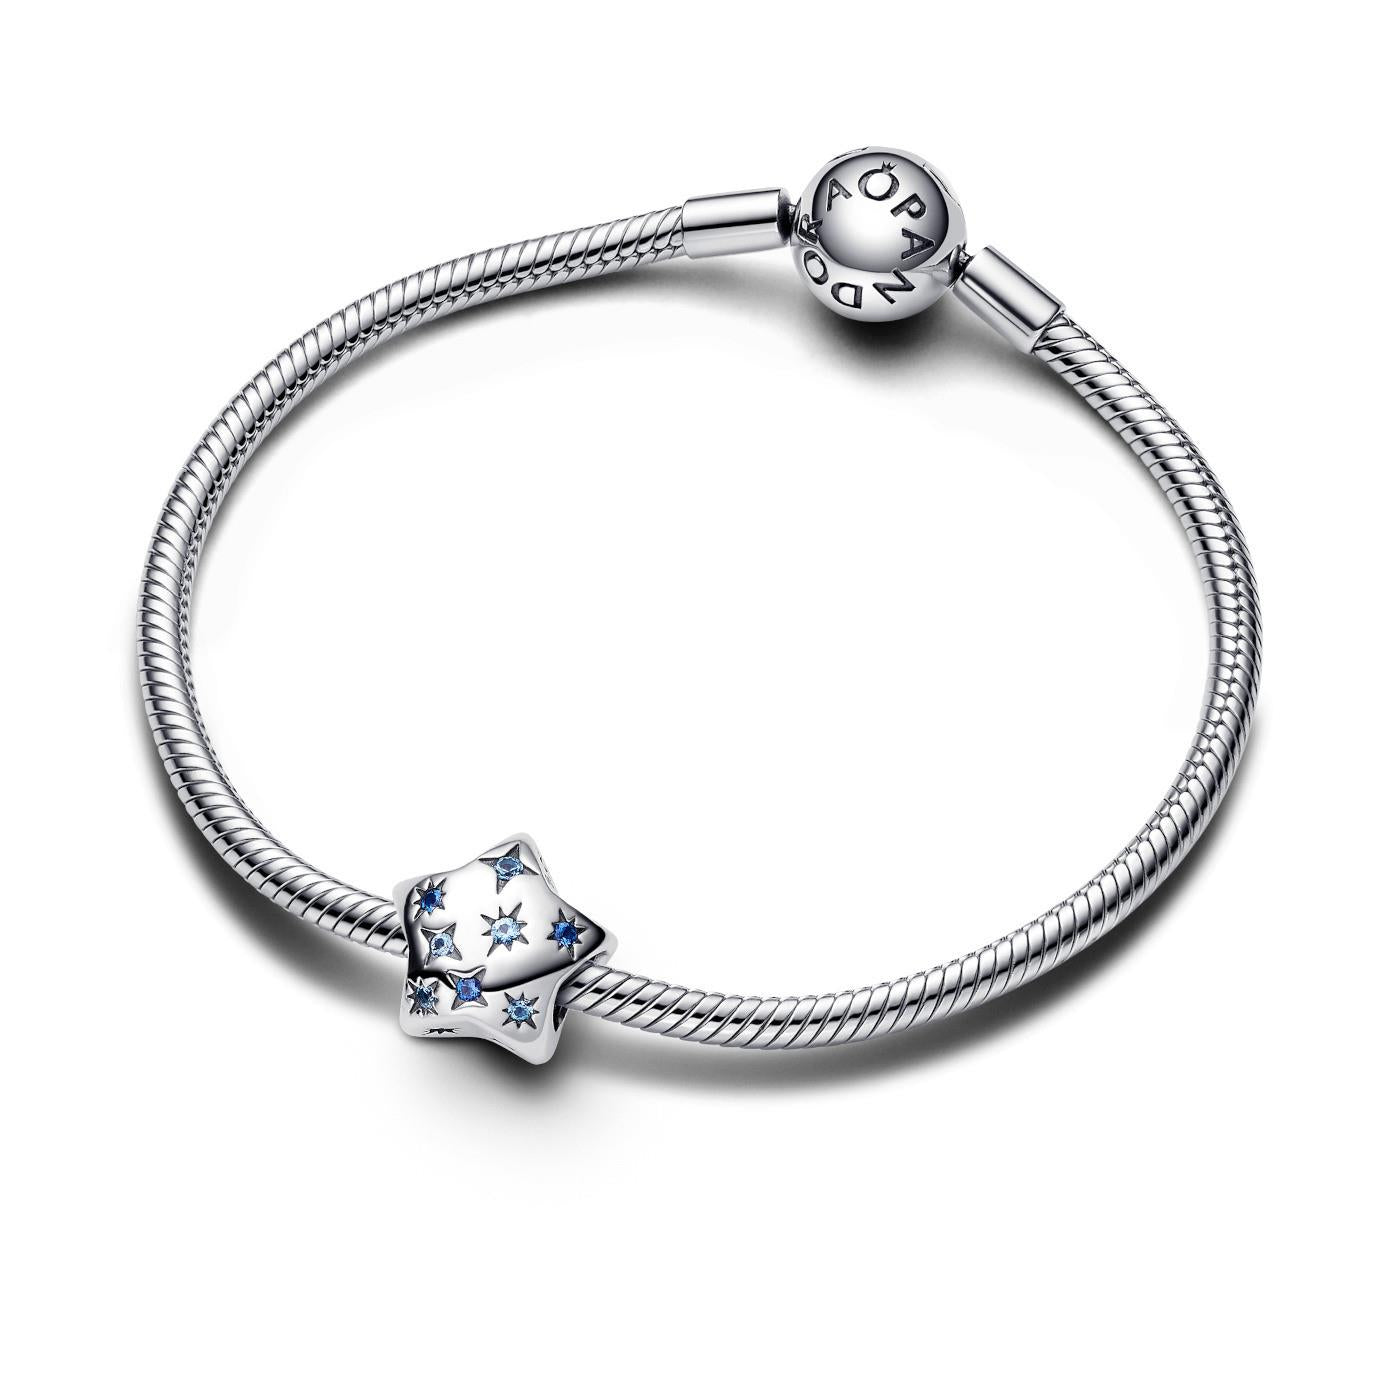 Pandora Star sterling silver charm with stellar blue and icy blue crystal